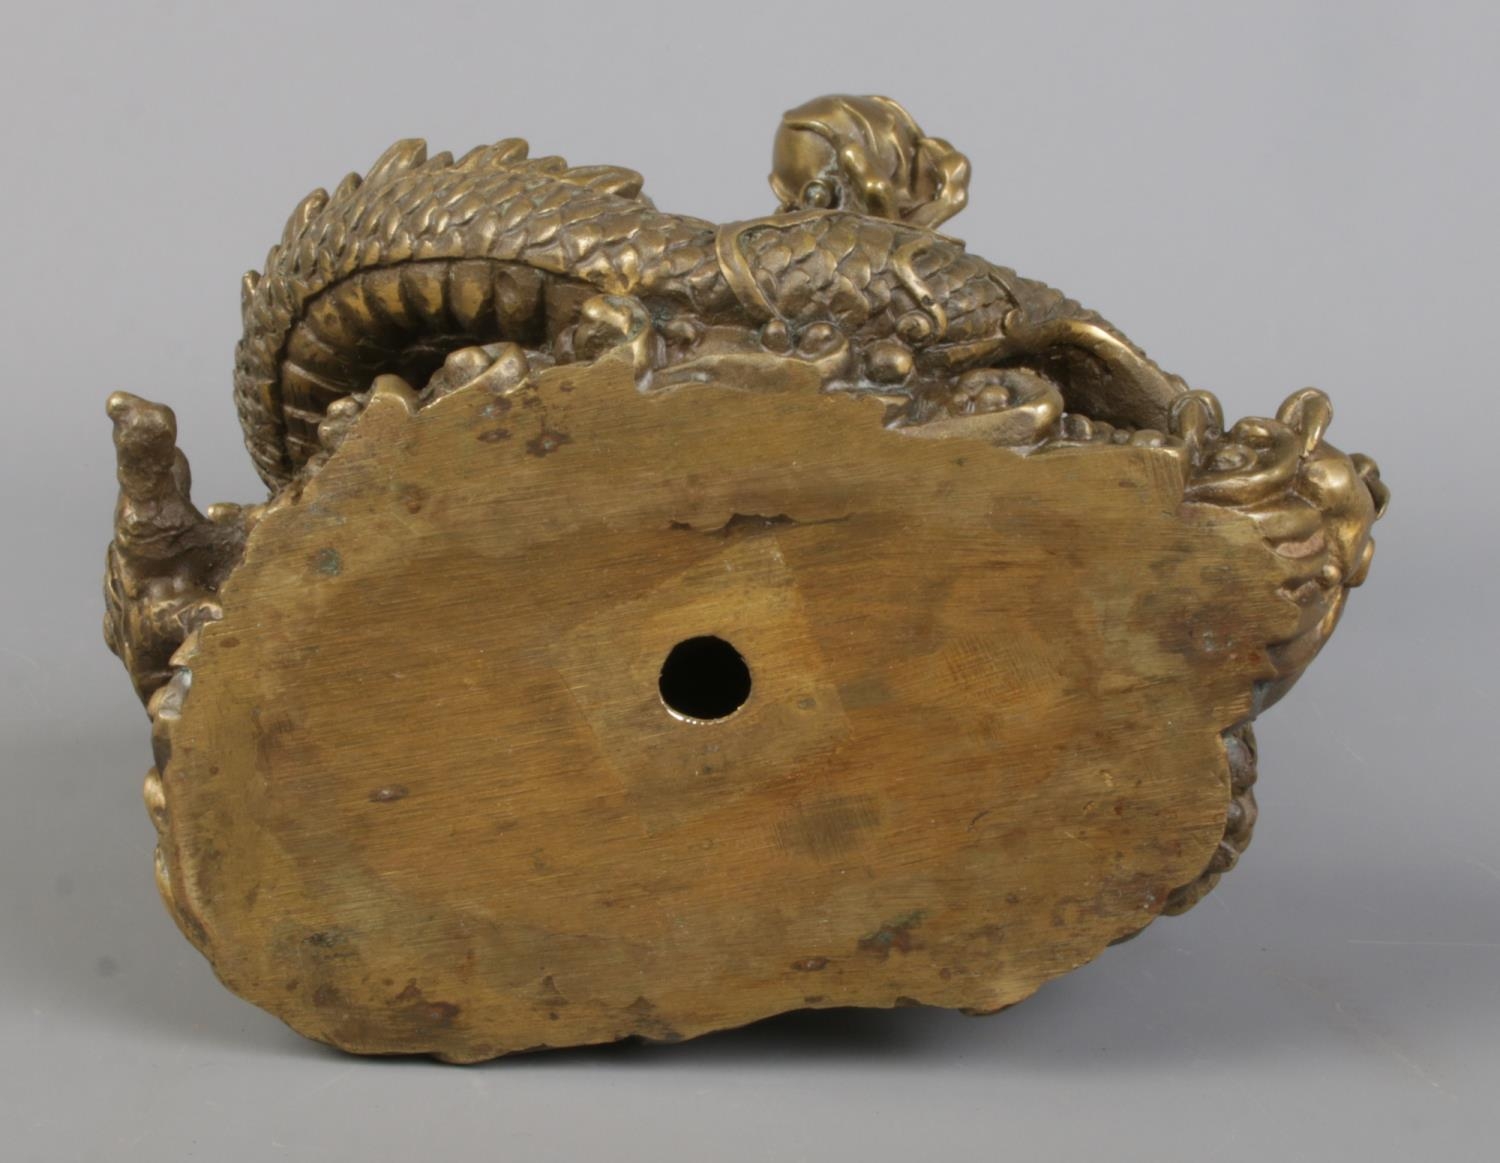 A cast bronze sculpture of a Chinese dragon holding a flaming pearl. Height 18cm. - Image 5 of 5